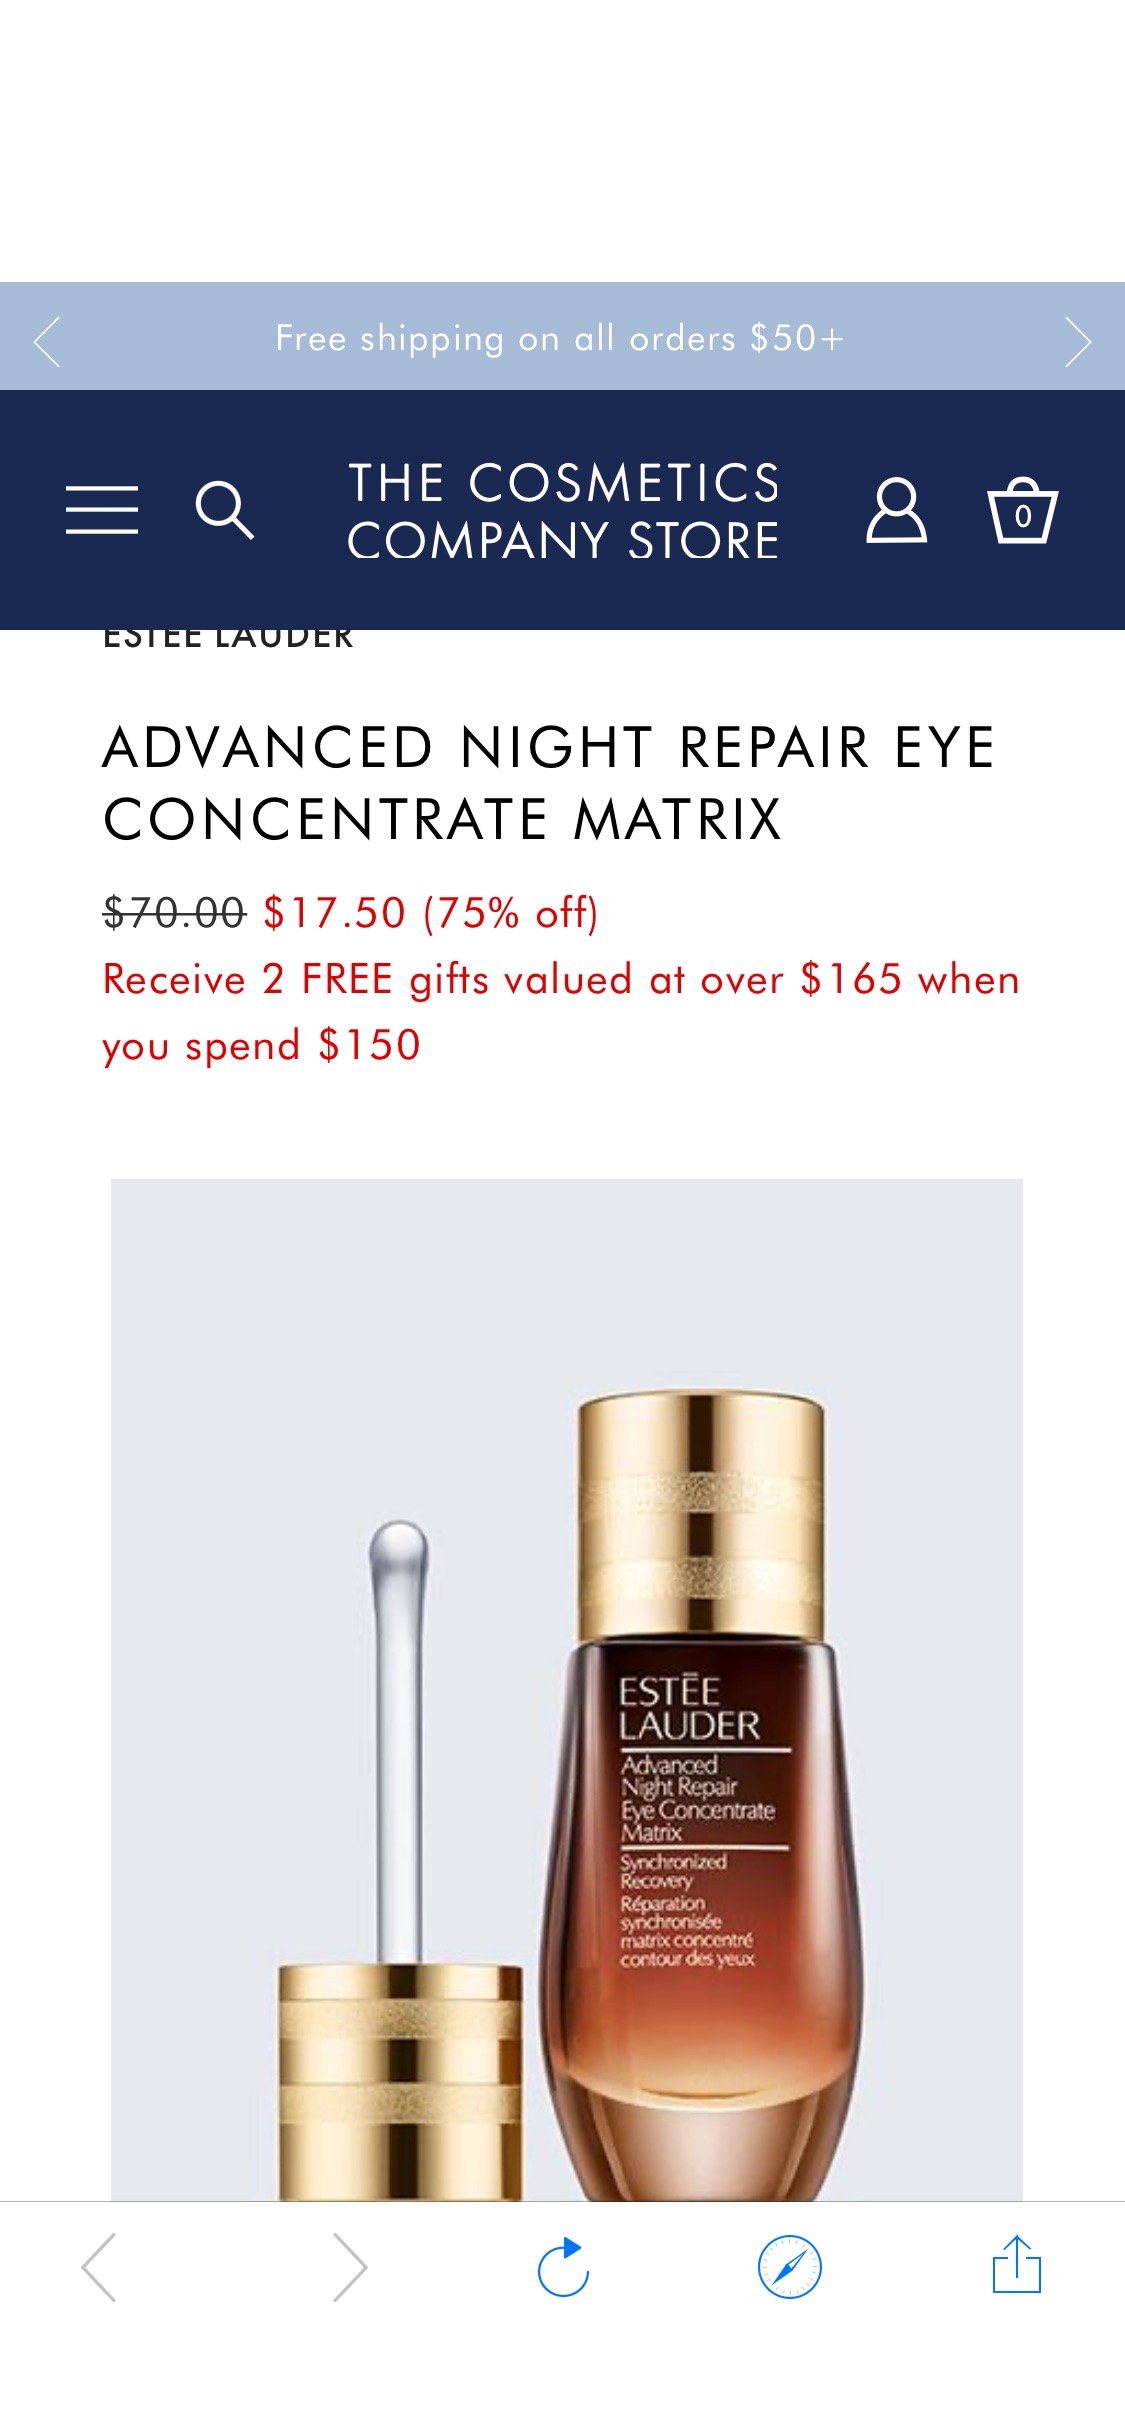 ADVANCED NIGHT REPAIR EYE CONCENTRATE MATRIX | The Cosmetics Company Store | Beauty Products, Skin Care & Makeup